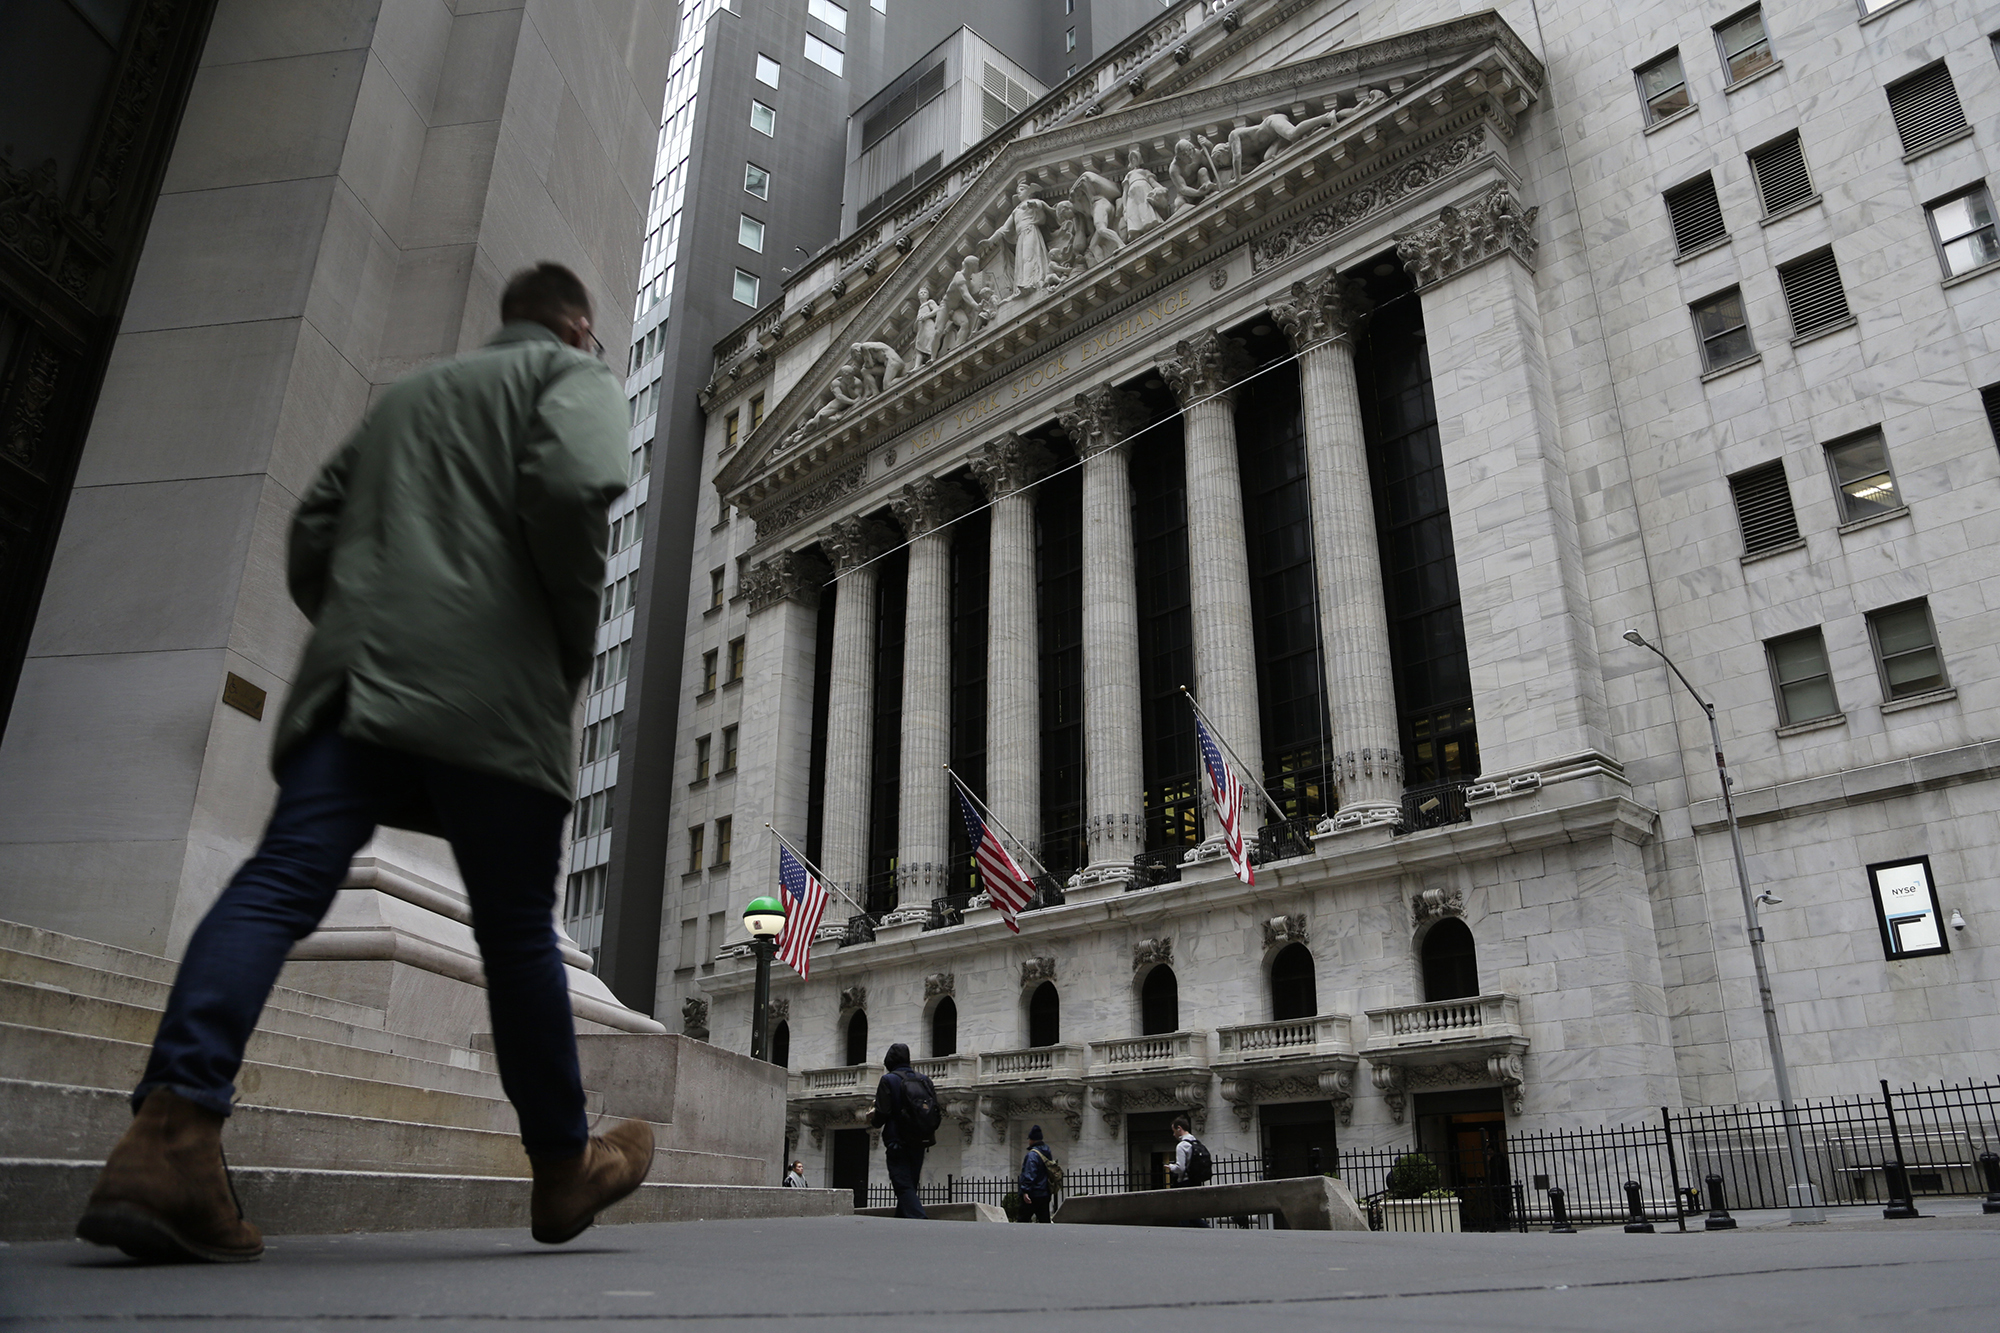 A person is seen walking in front of the New York Stock Exchange on Wall Street.